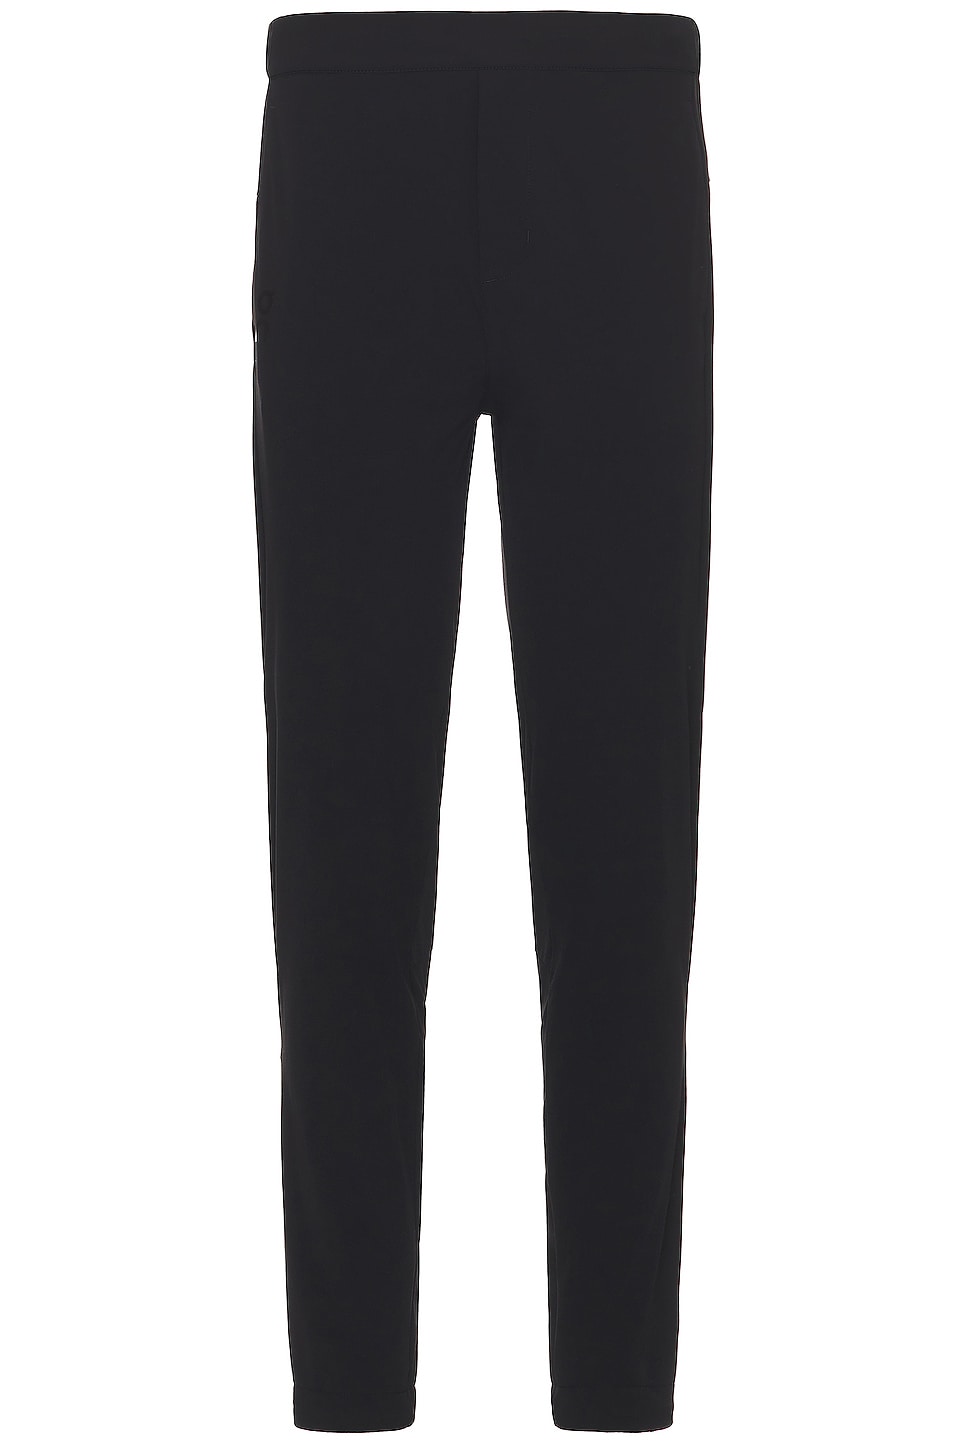 Image 1 of On Active Pants in Black